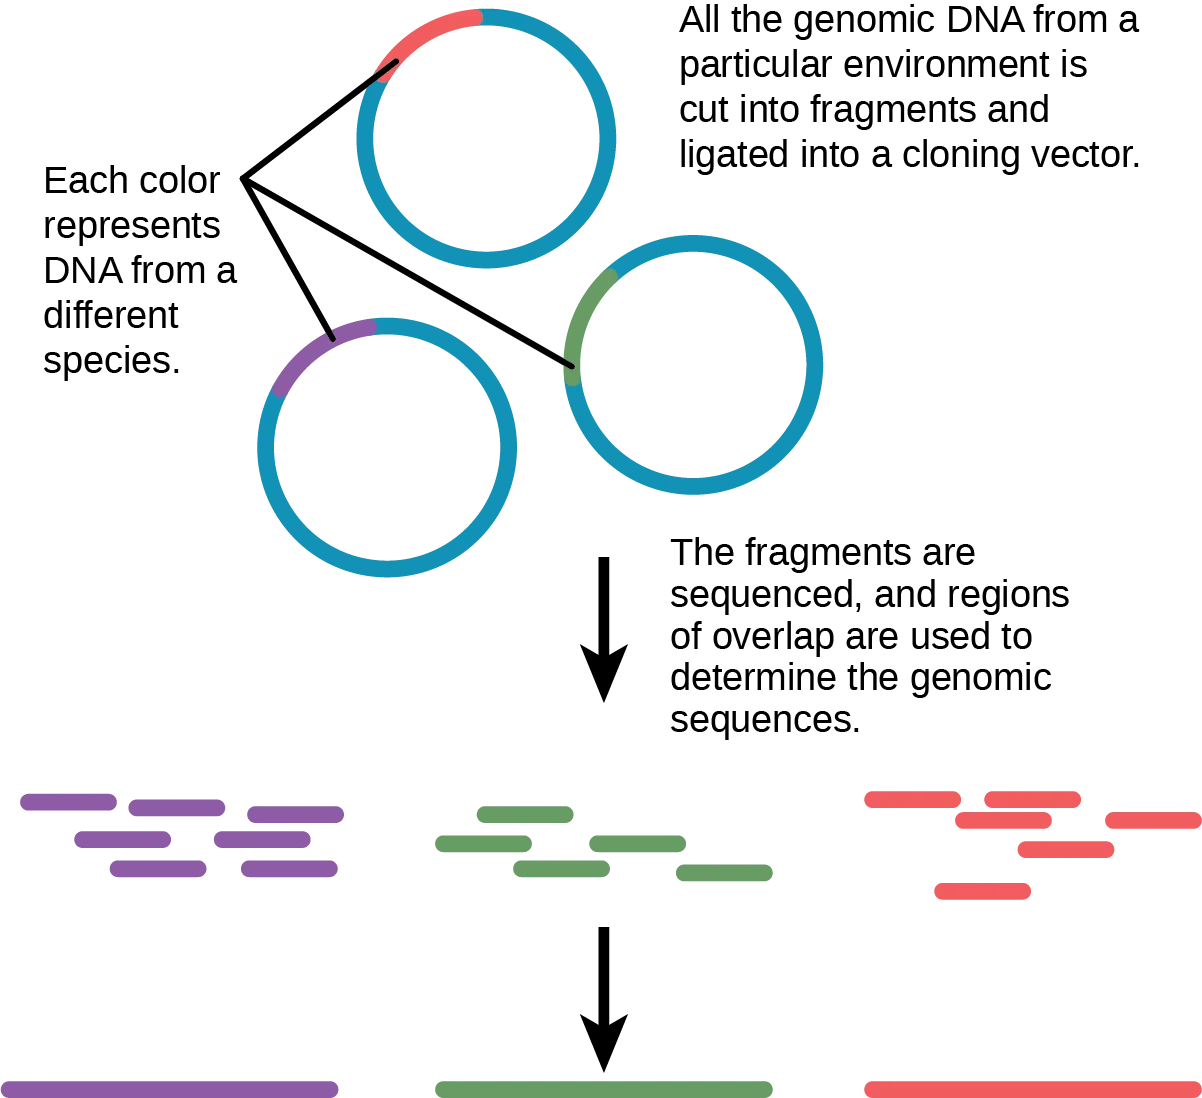 In metagenomics, all of the genomic DNA from a particular environment is cut into fragments and ligated into a cloning vector. The fragments, which may be from several different species, are sequenced. Regions of overlap indicate that two fragments came from the same species. Thus, the genome of each species present can be determined.